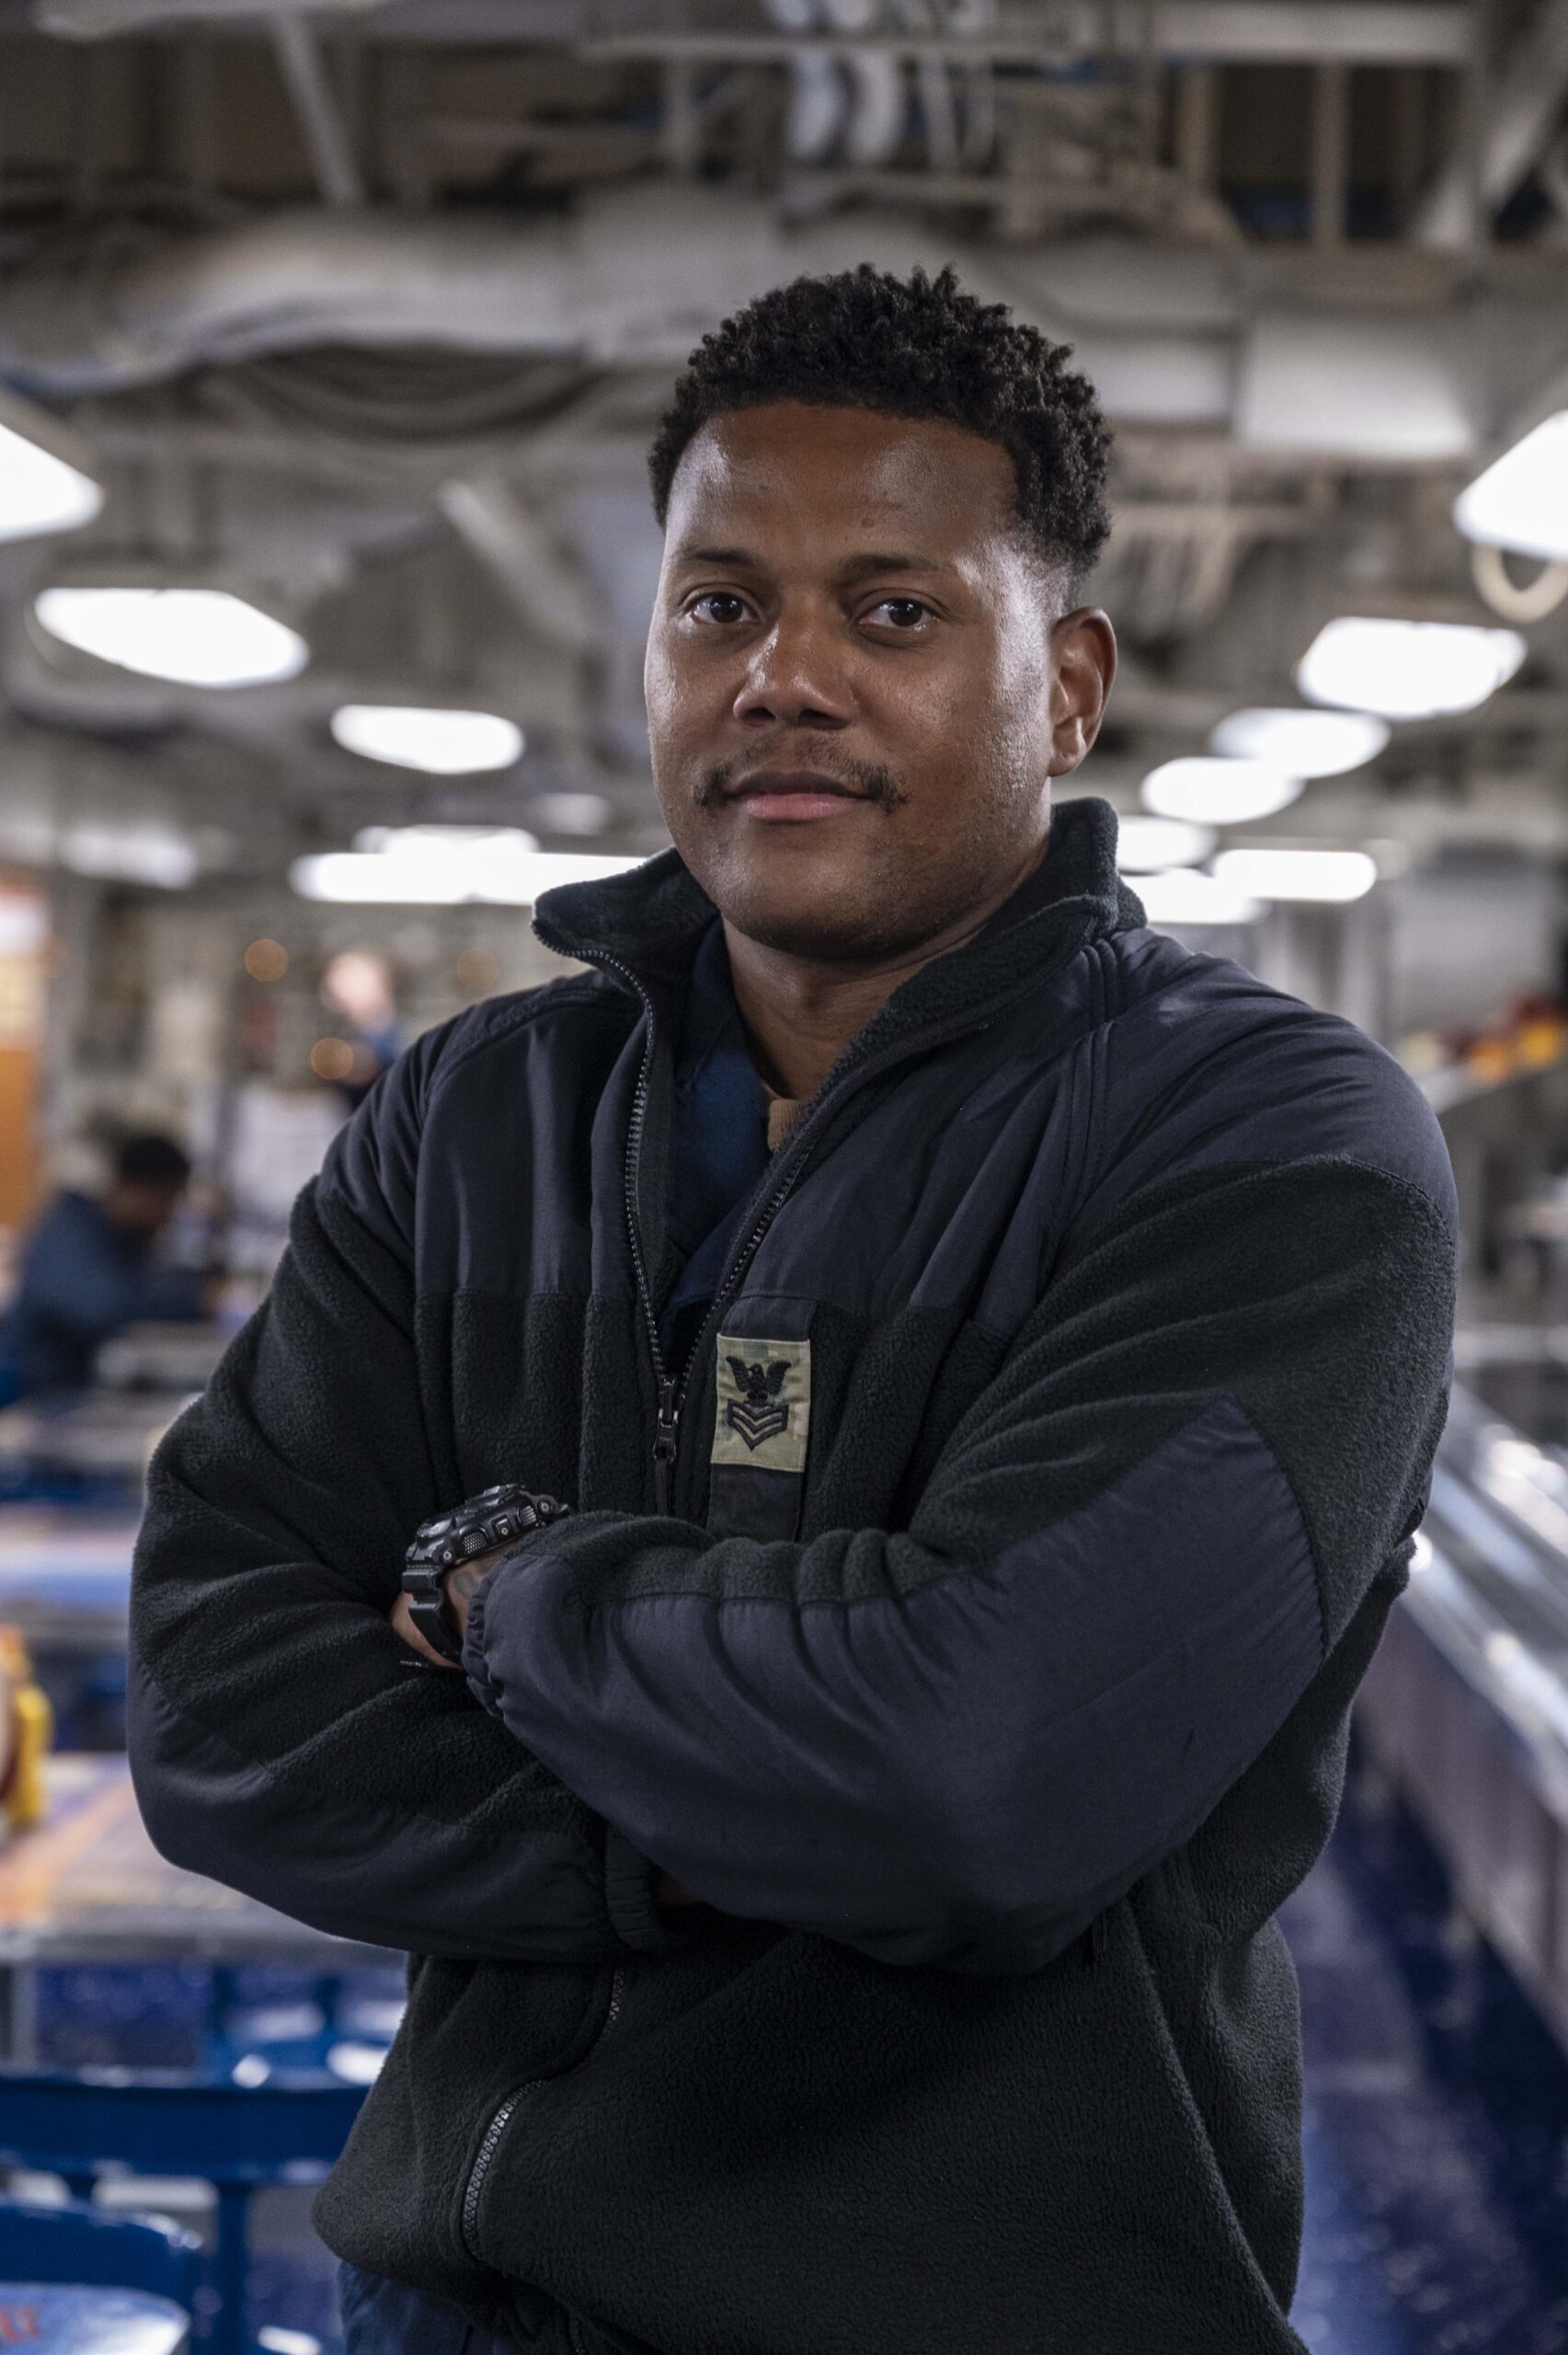 Pittsburgh native participates in world’s largest international maritime warfare exercise